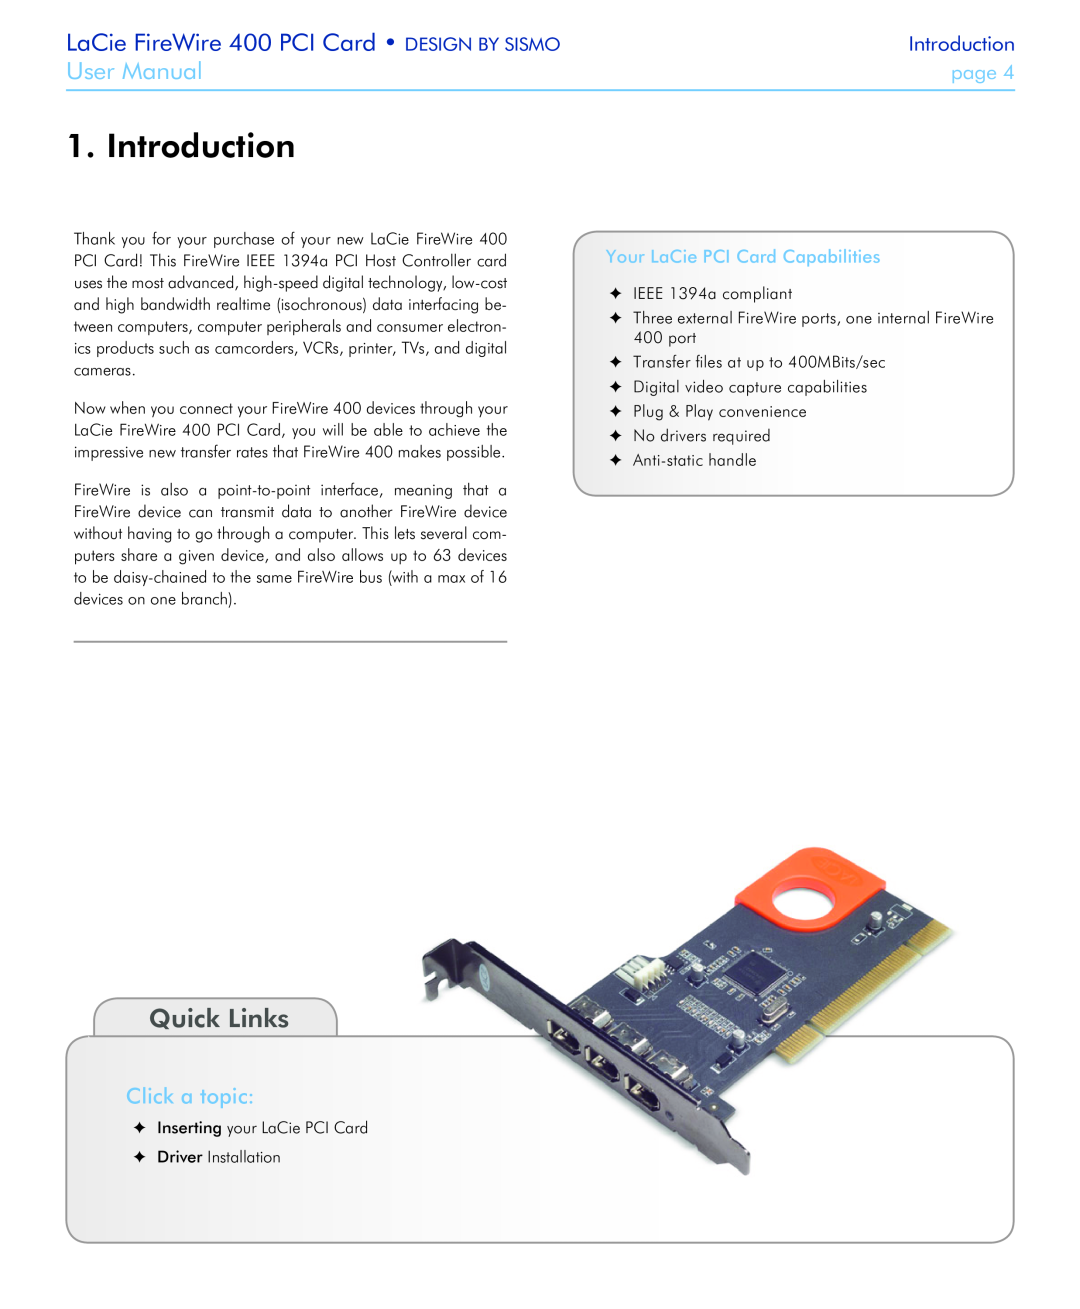 LaCie 400 user manual Introduction, Quick Links, Click a topic, Your LaCie PCI Card Capabilities, User Manual, page 